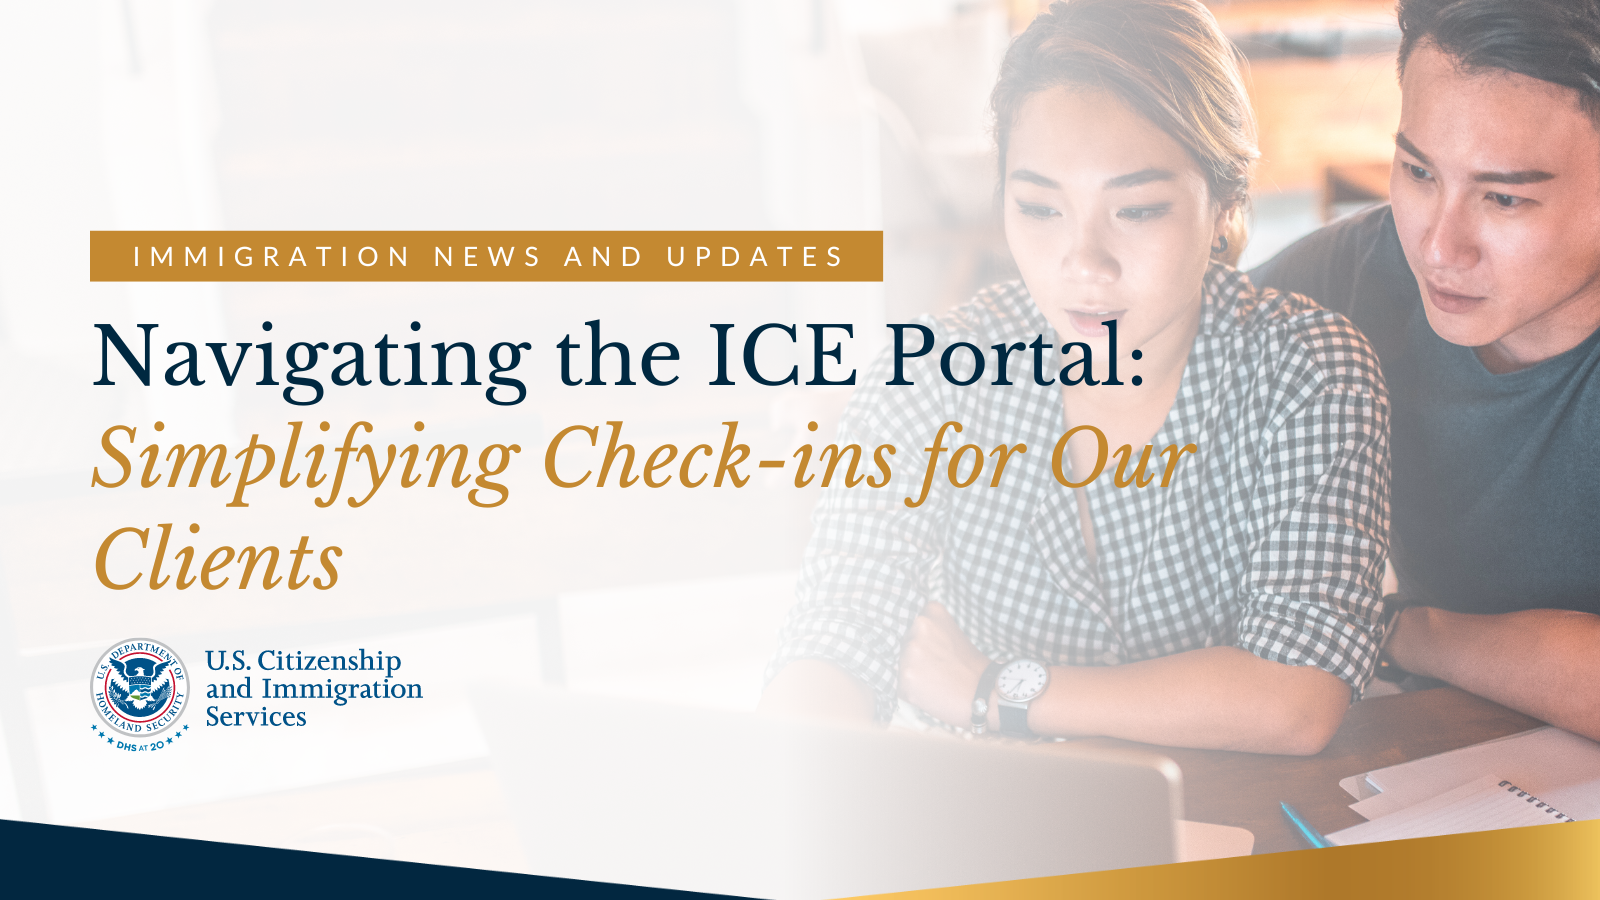 Navigating the ICE Portal: Simplifying Check-ins for Our Clients